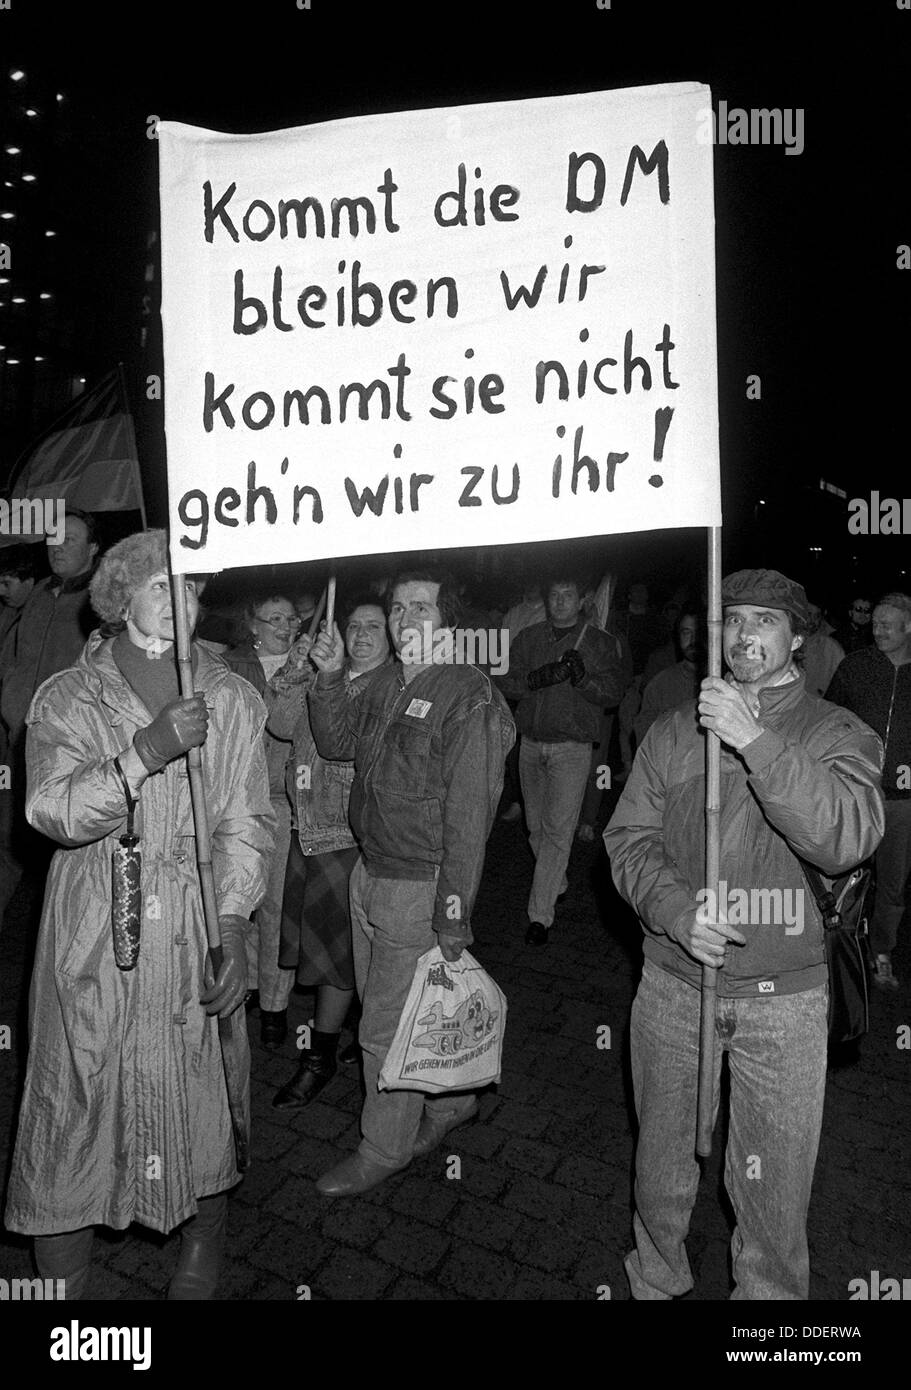 The picture shows a poster saying 'If the Deutsche Mark comes we will stay, if she doesn't come we will go to her' during a Monday demonstration in Leipzig on 12 February 1990. The demonstrators demand the introduction of the Deutsche Mark in the GDR which was put into effect in the scope of the economic, monetary and social union on 01 July 1990. It was one of the decisive steps towards the reunion of the two German states. Stock Photo